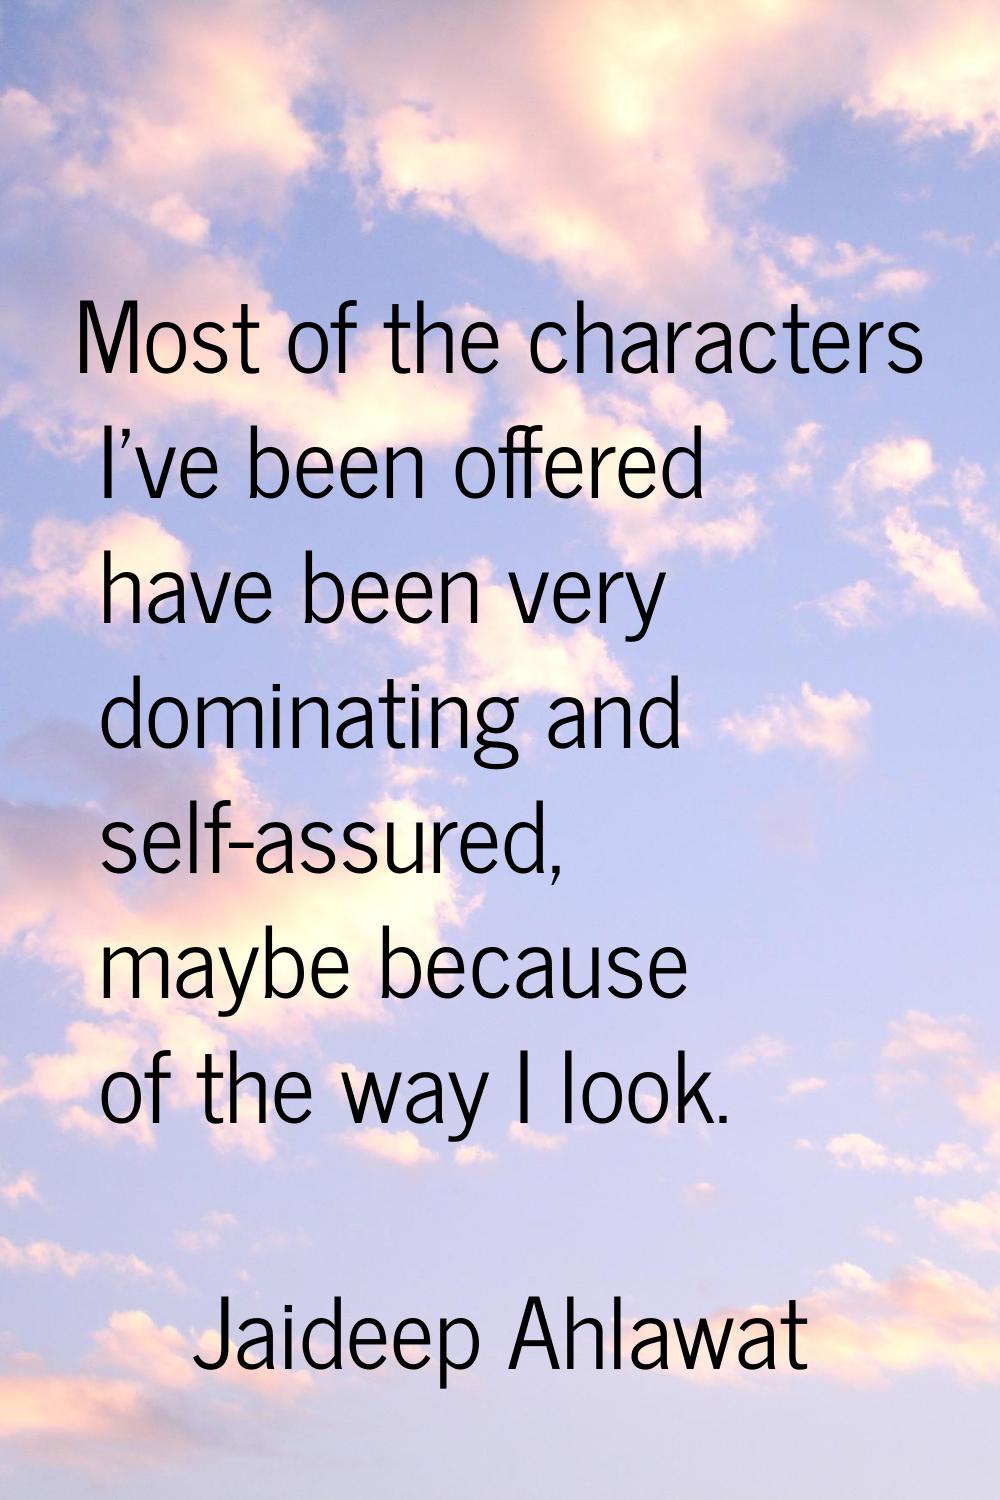 Most of the characters I've been offered have been very dominating and self-assured, maybe because 